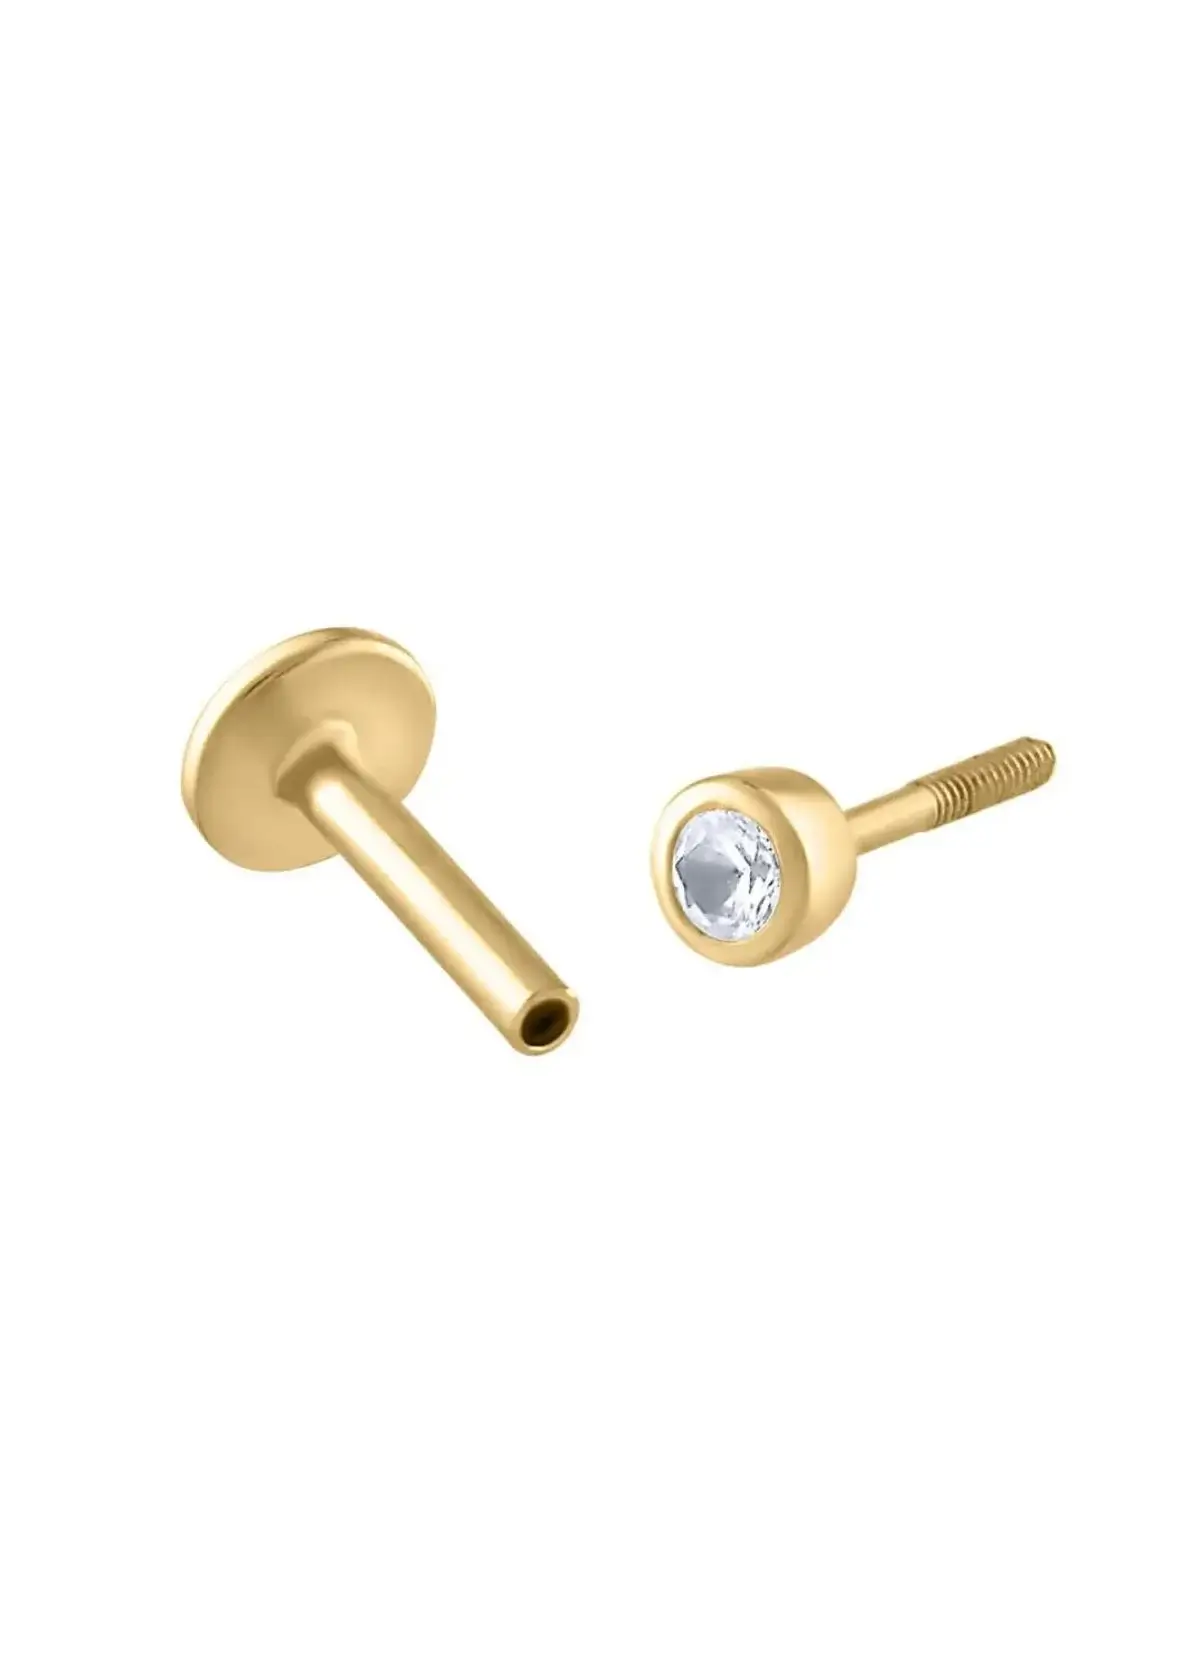 Do flat-back earrings in gold have any special care instructions?